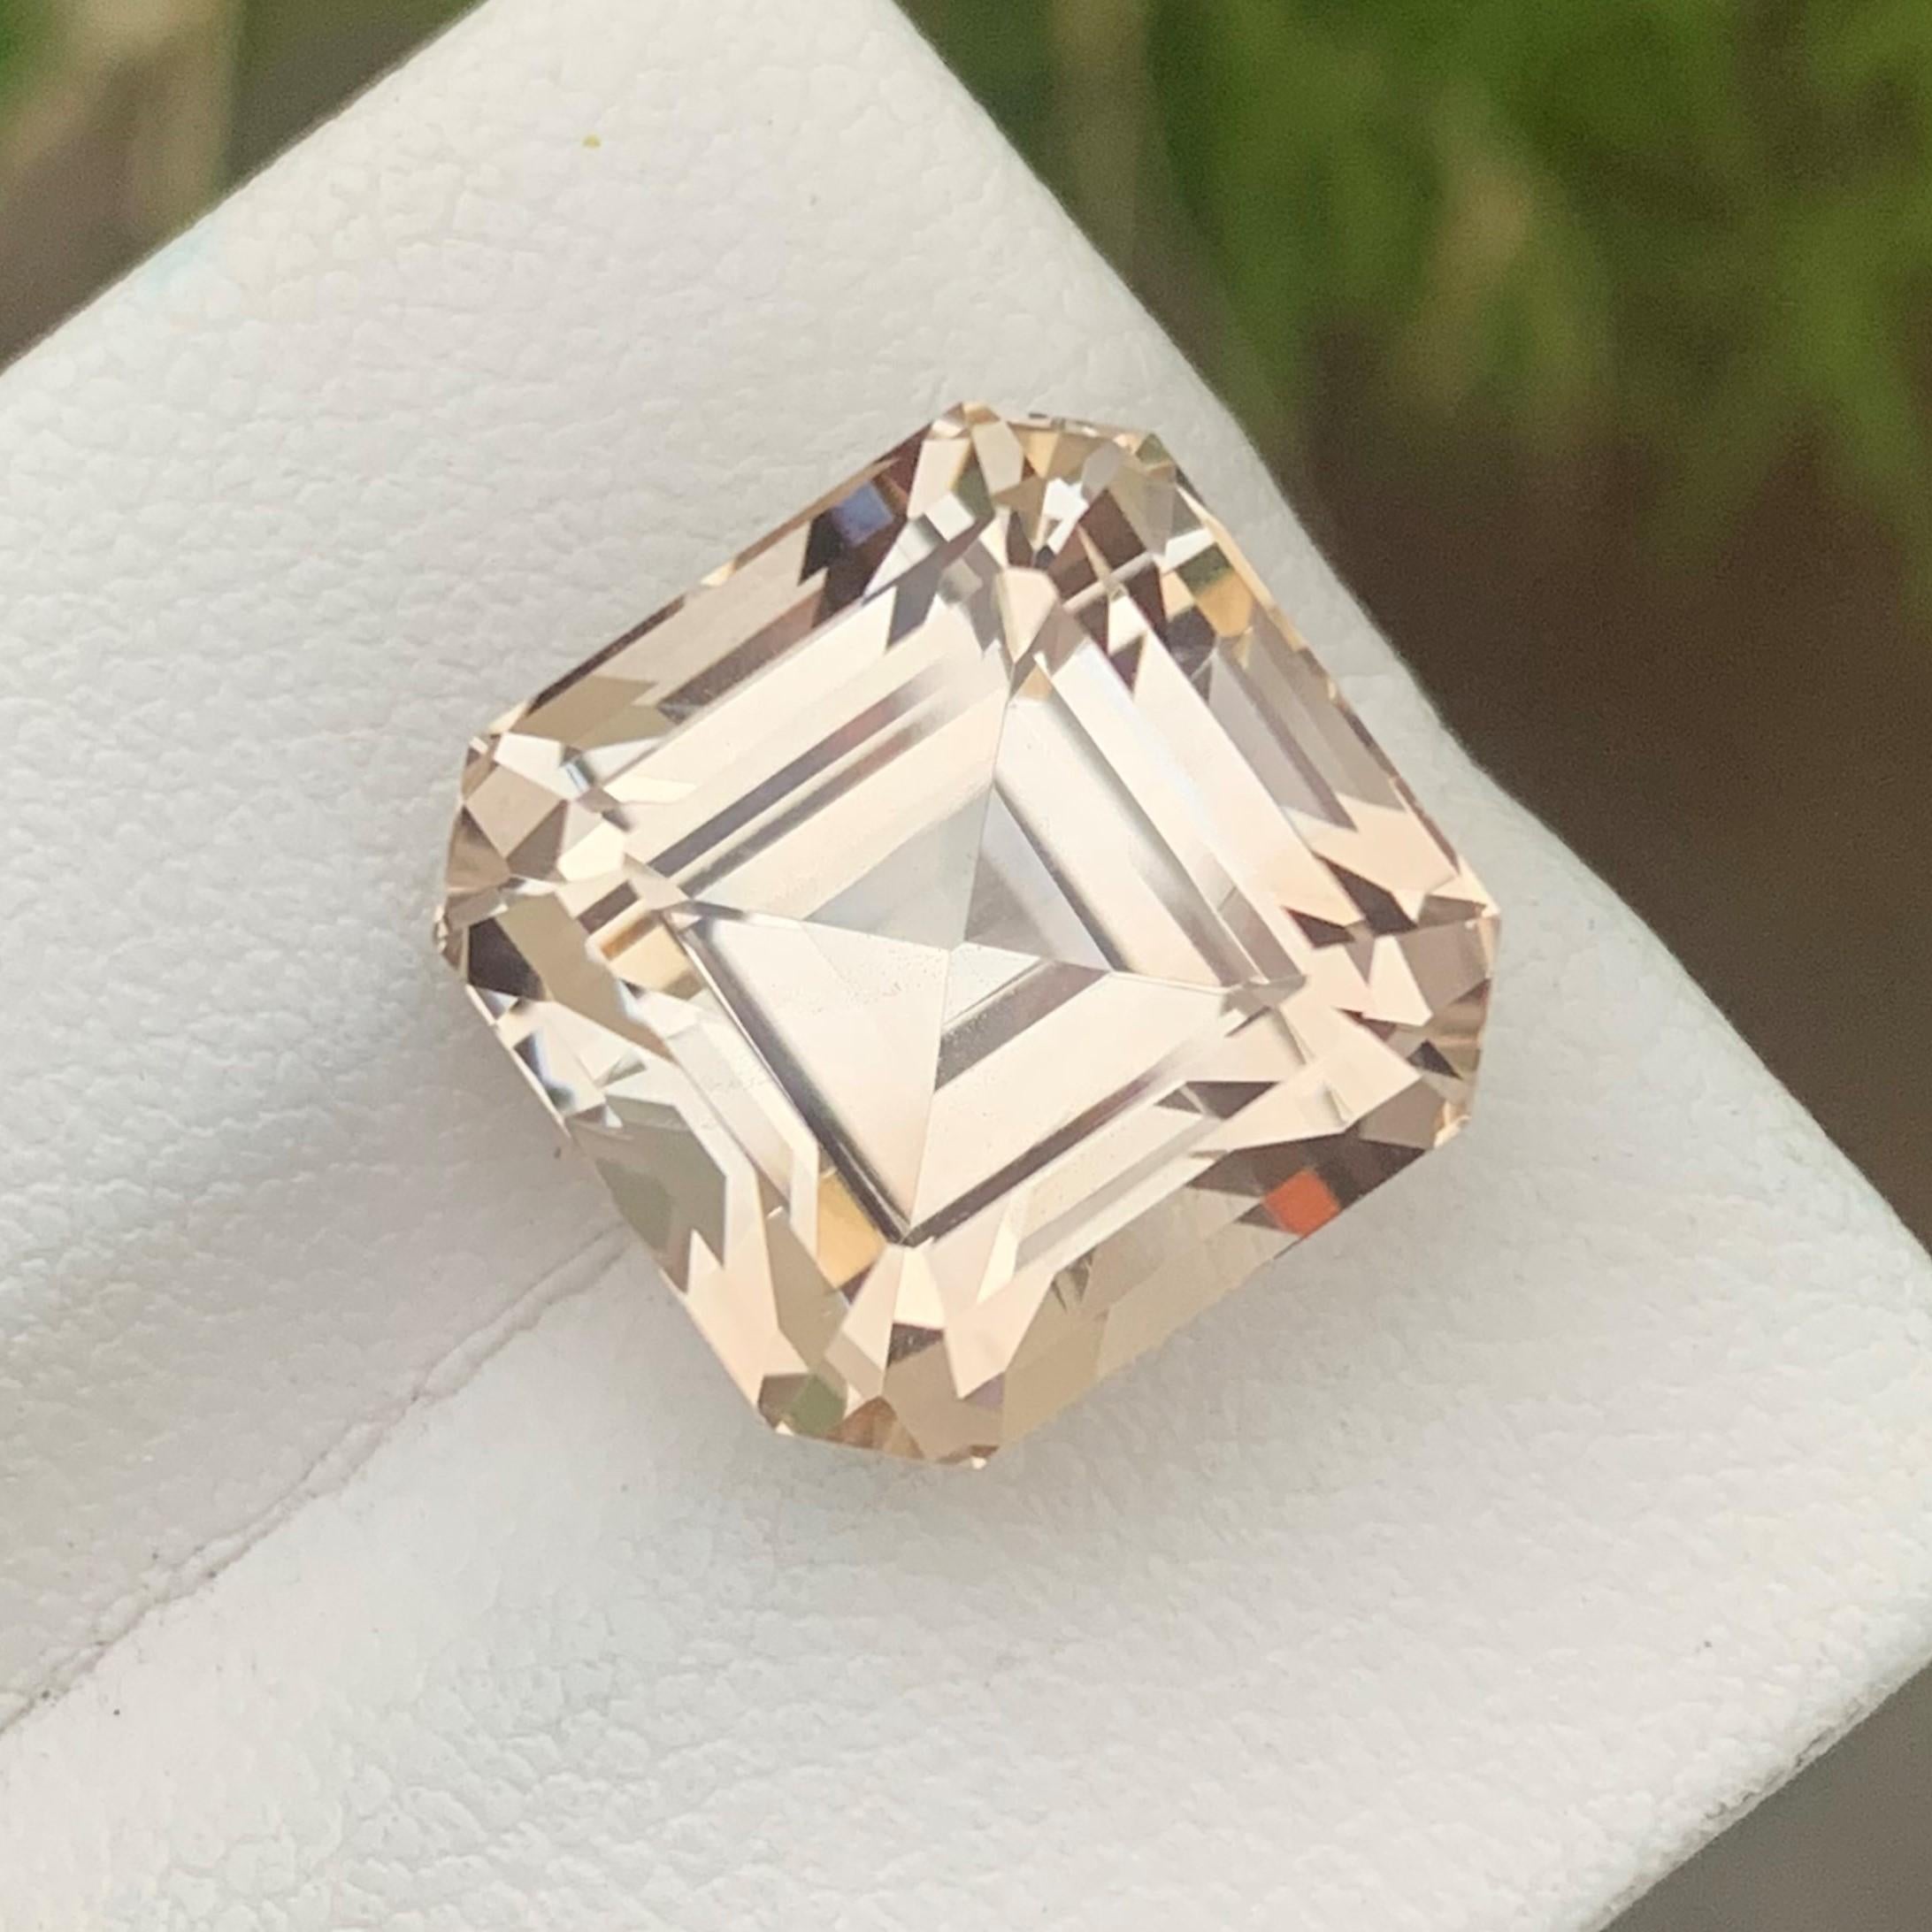 Gemstone Type : Topaz
Weight : 16.20 Carats
Dimensions: 12.7x12.8x11 mm
Clarity : Clean
Origin : Skardu
Color: Golden
Shape: Octagon
Cut: Asscher
Certificate: On Demand
Month: November
November Birthstone. Those with November birthdays have two